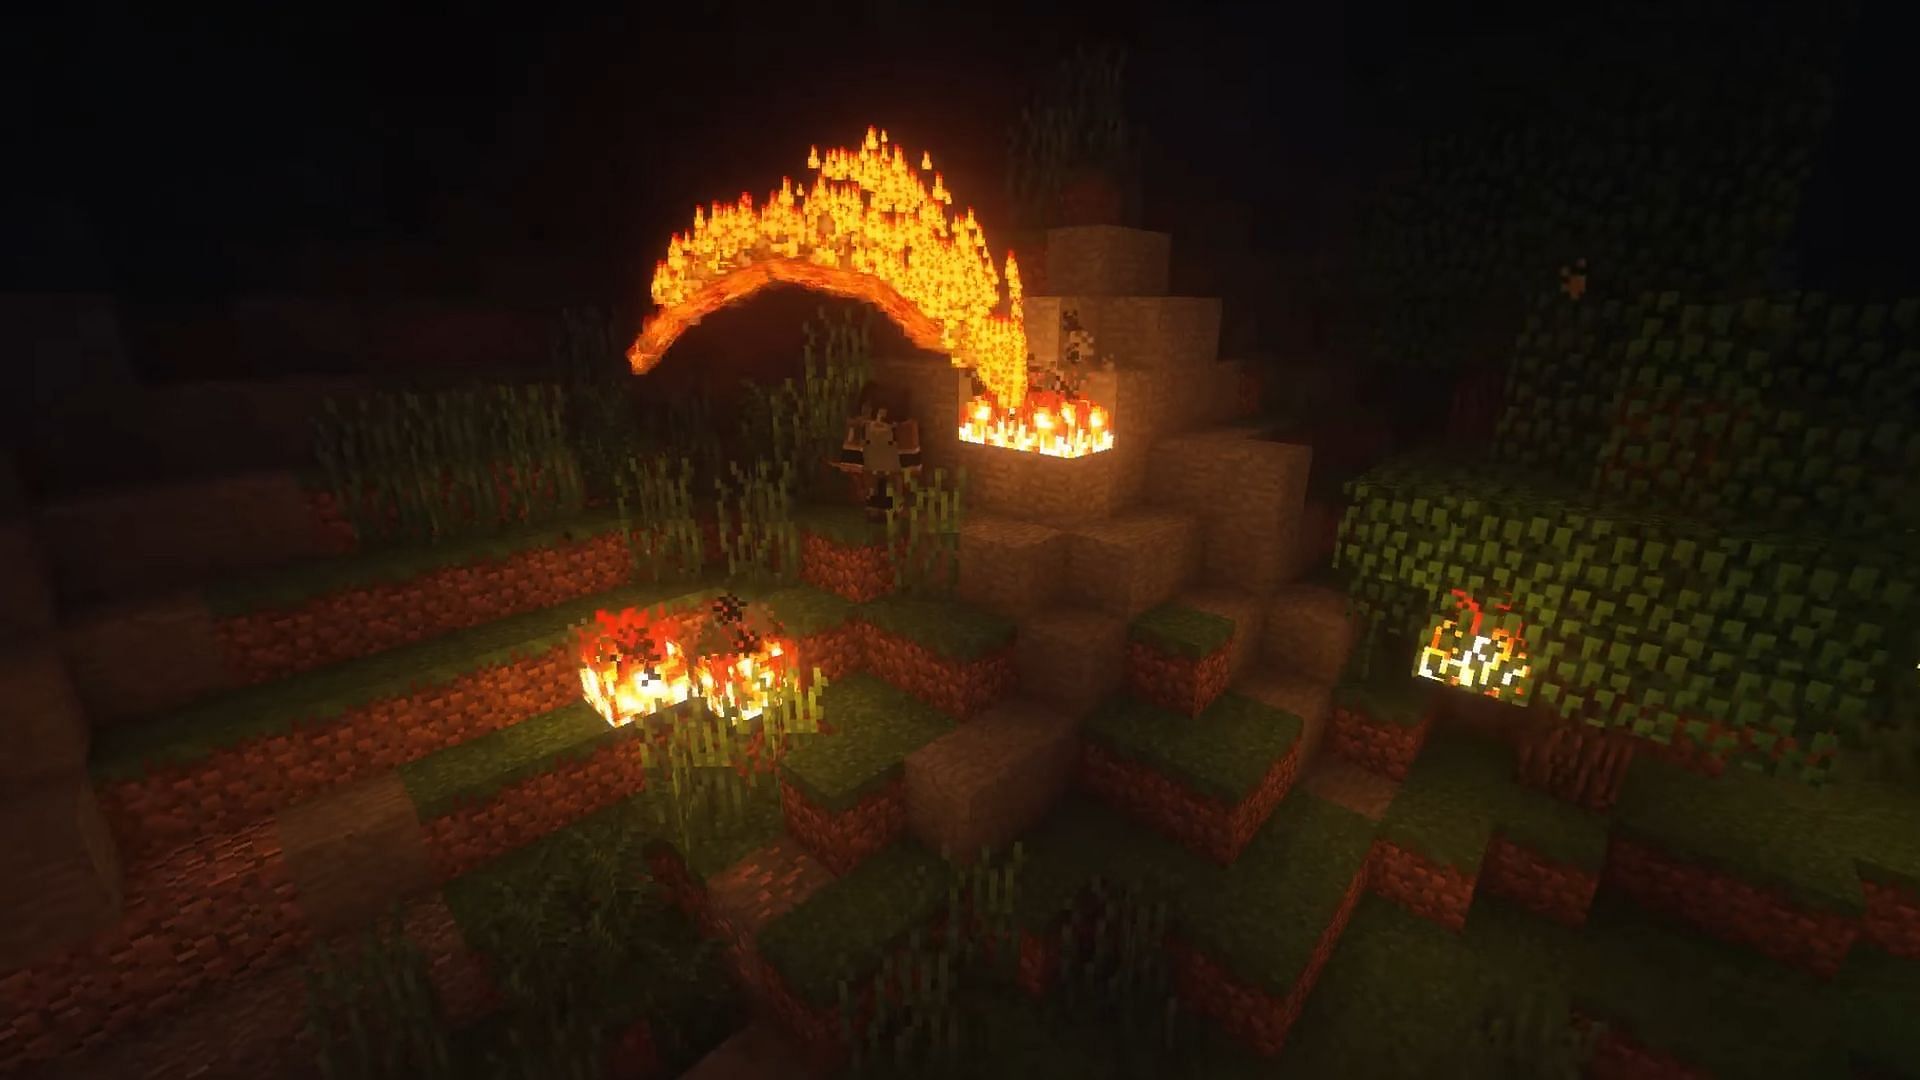 A Minecraft player harnesses their Firebending skills in Avatar Mod 2 (Image via ProjectKorra/YouTube)